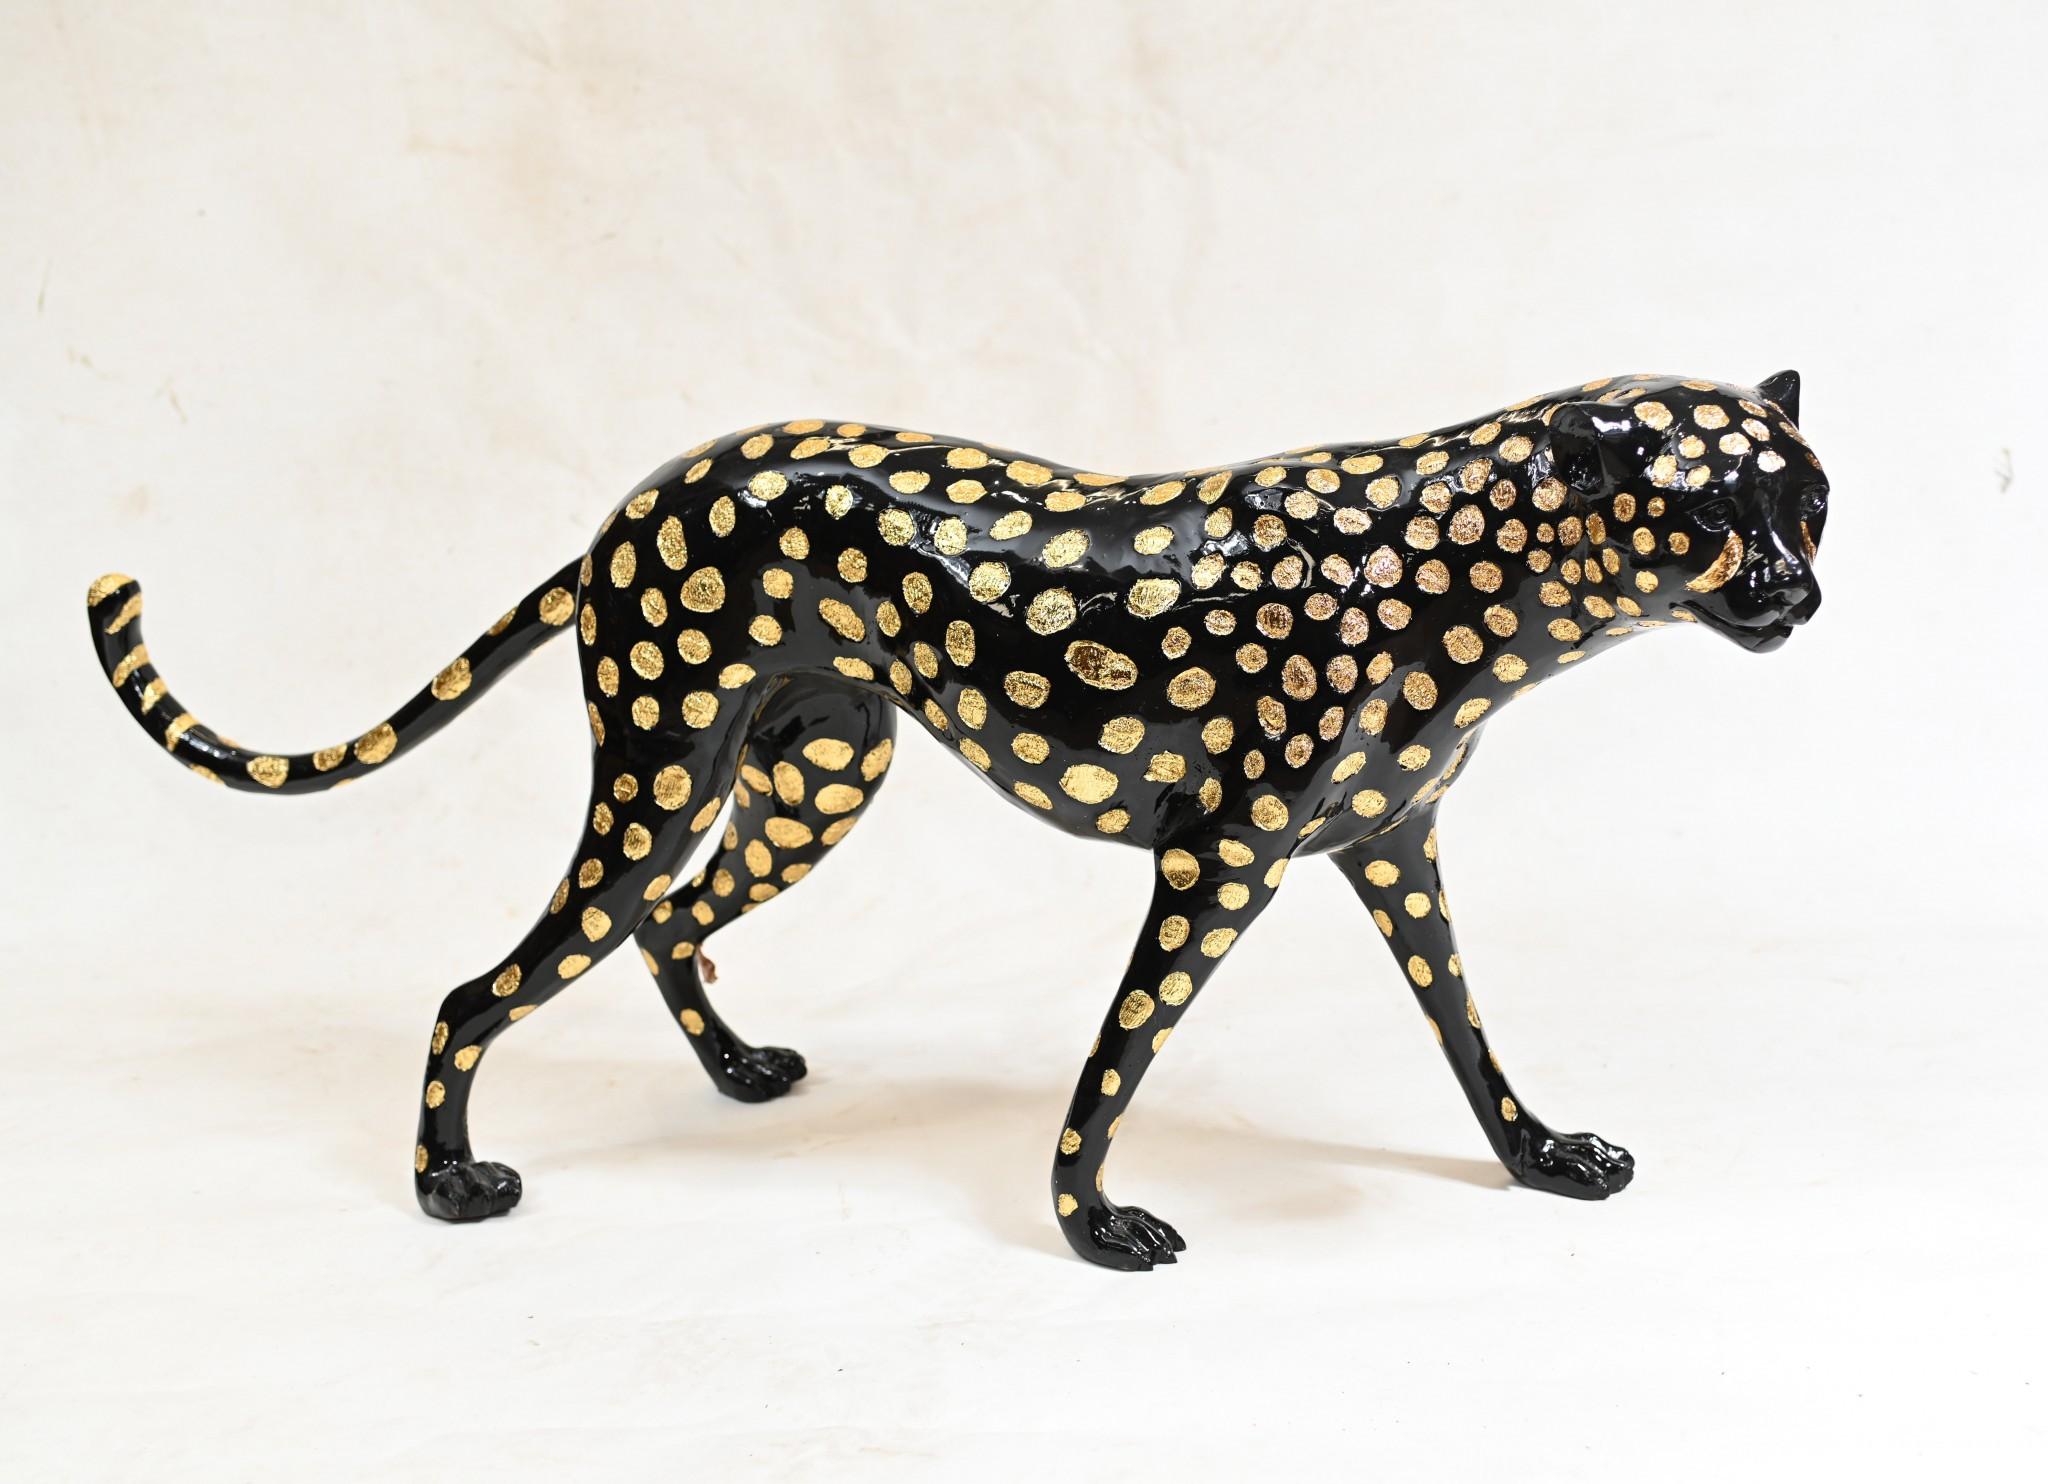 Gorgeous bronze casting of a large black leopard in the Art Deco style
Good size at almost four feet in length
Casting is superb, look at how the creatures spots have been rendered in black
Artist has really captured the beauty and poise to the